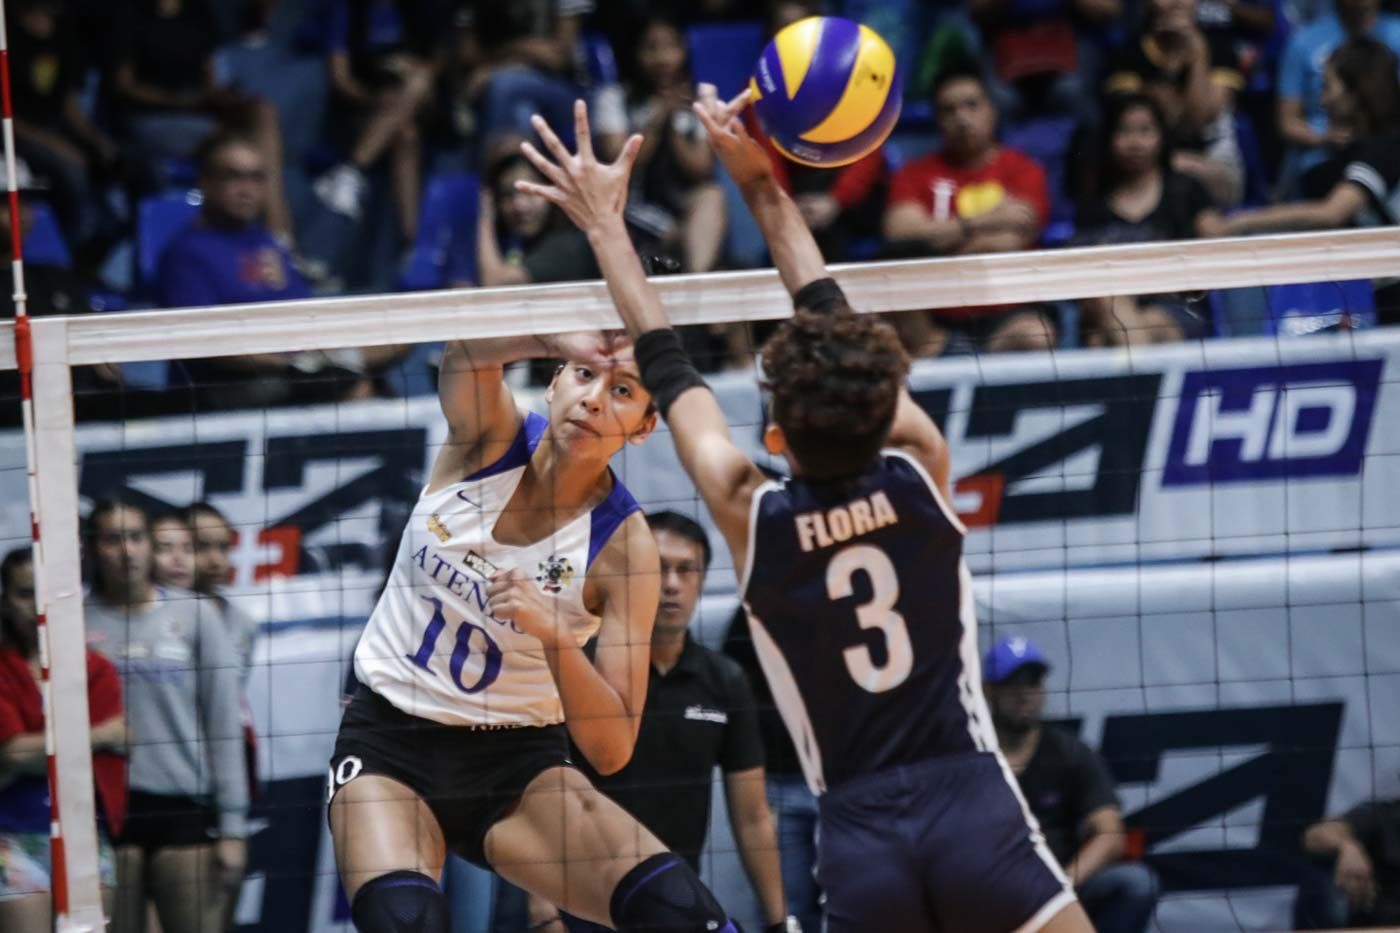 ‘Answered prayer’: Kat Tolentino to play final UAAP year with Ateneo